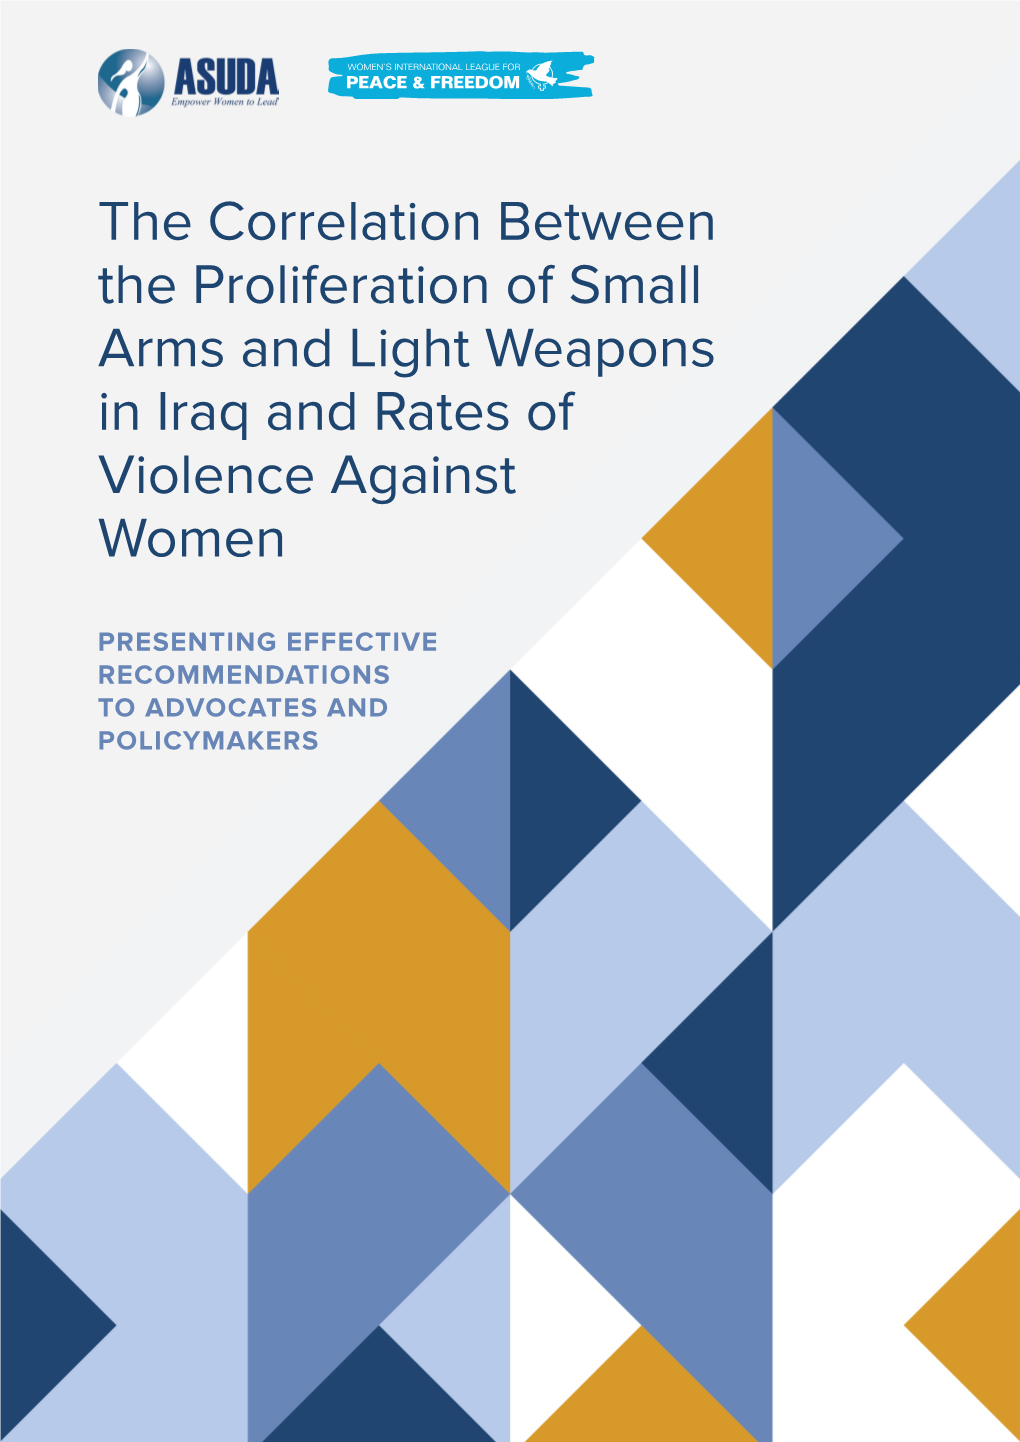 The Correlation Between the Proliferation of Small Arms and Light Weapons in Iraq and Rates of Violence Against Women